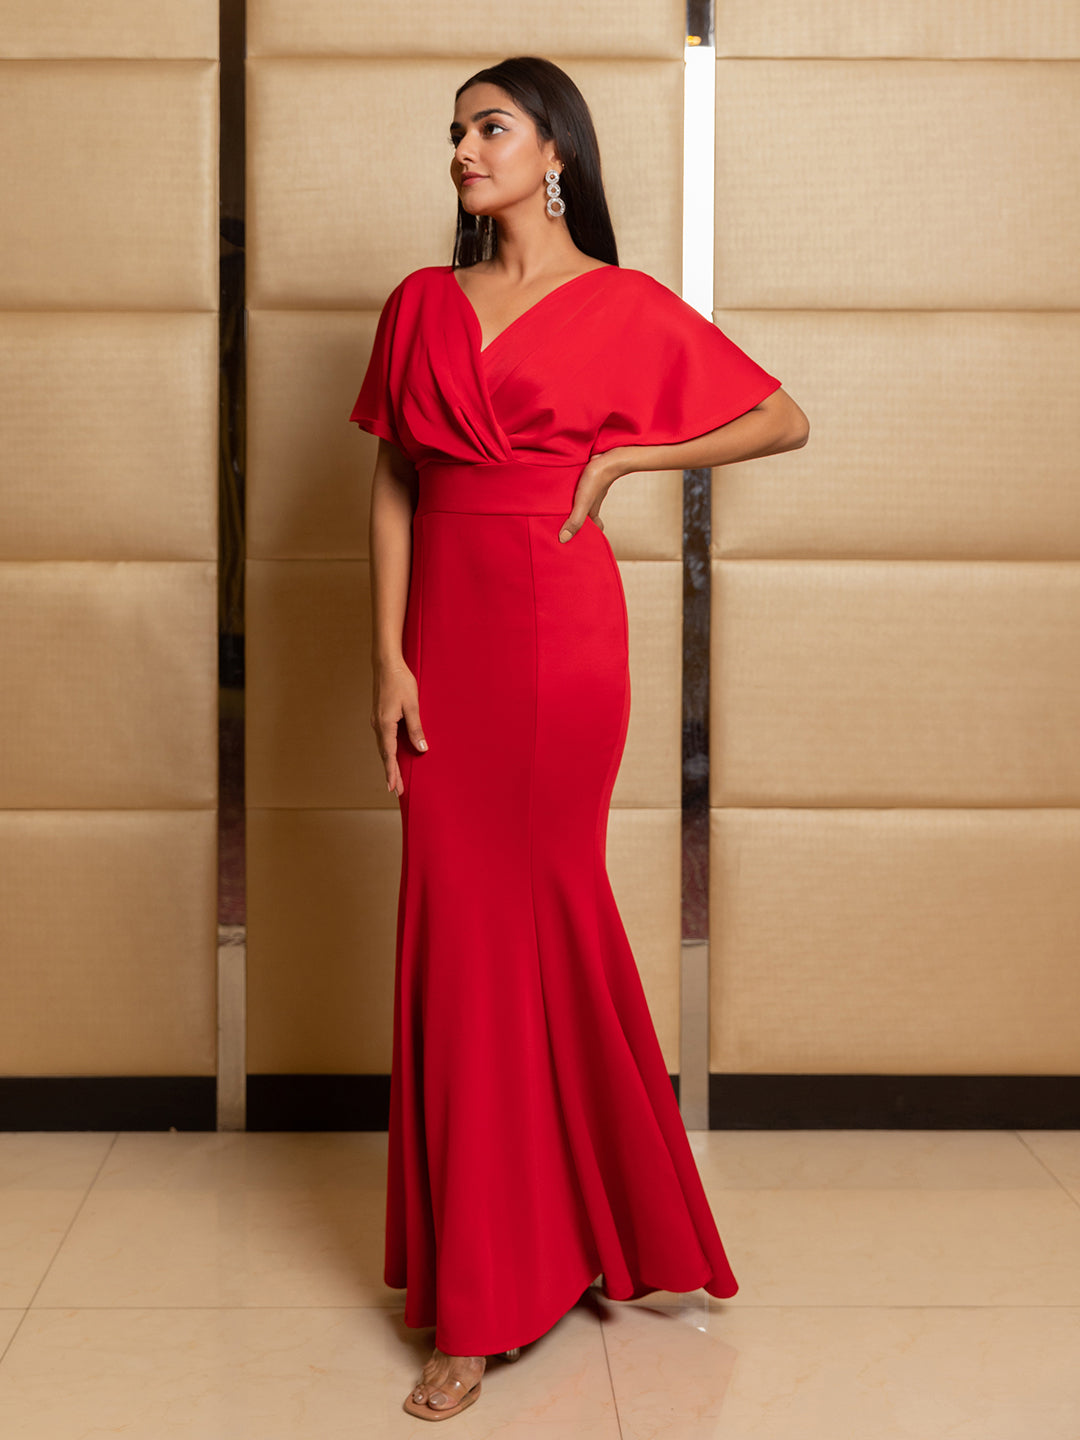 Classic Scarlet Red Gown for Women Online - B'Infinite